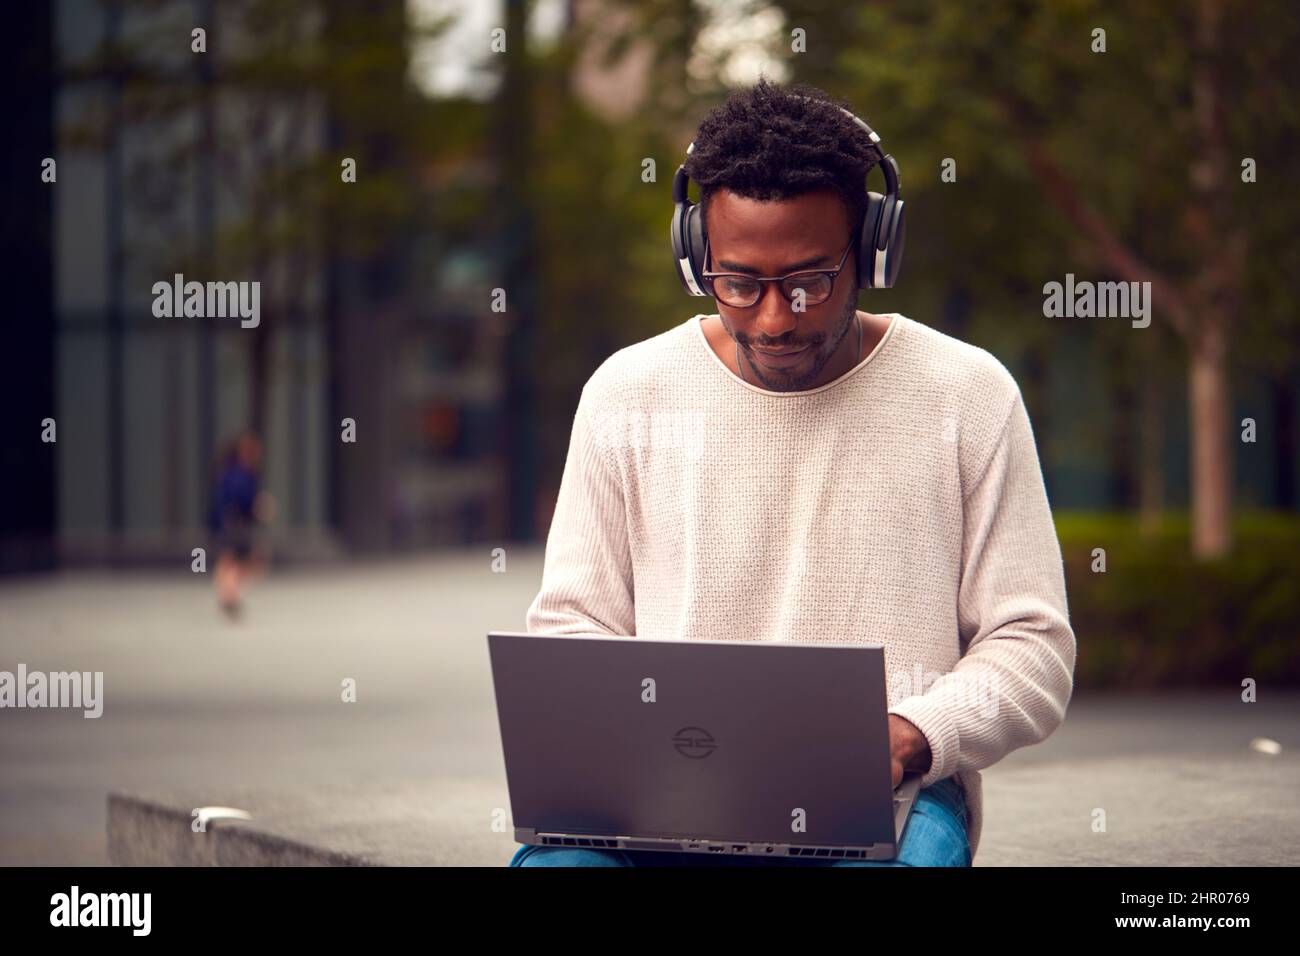 Male Vlogger Or Social Influencer Travelling Through City For Social Media Using Laptop Outdoors Stock Photo